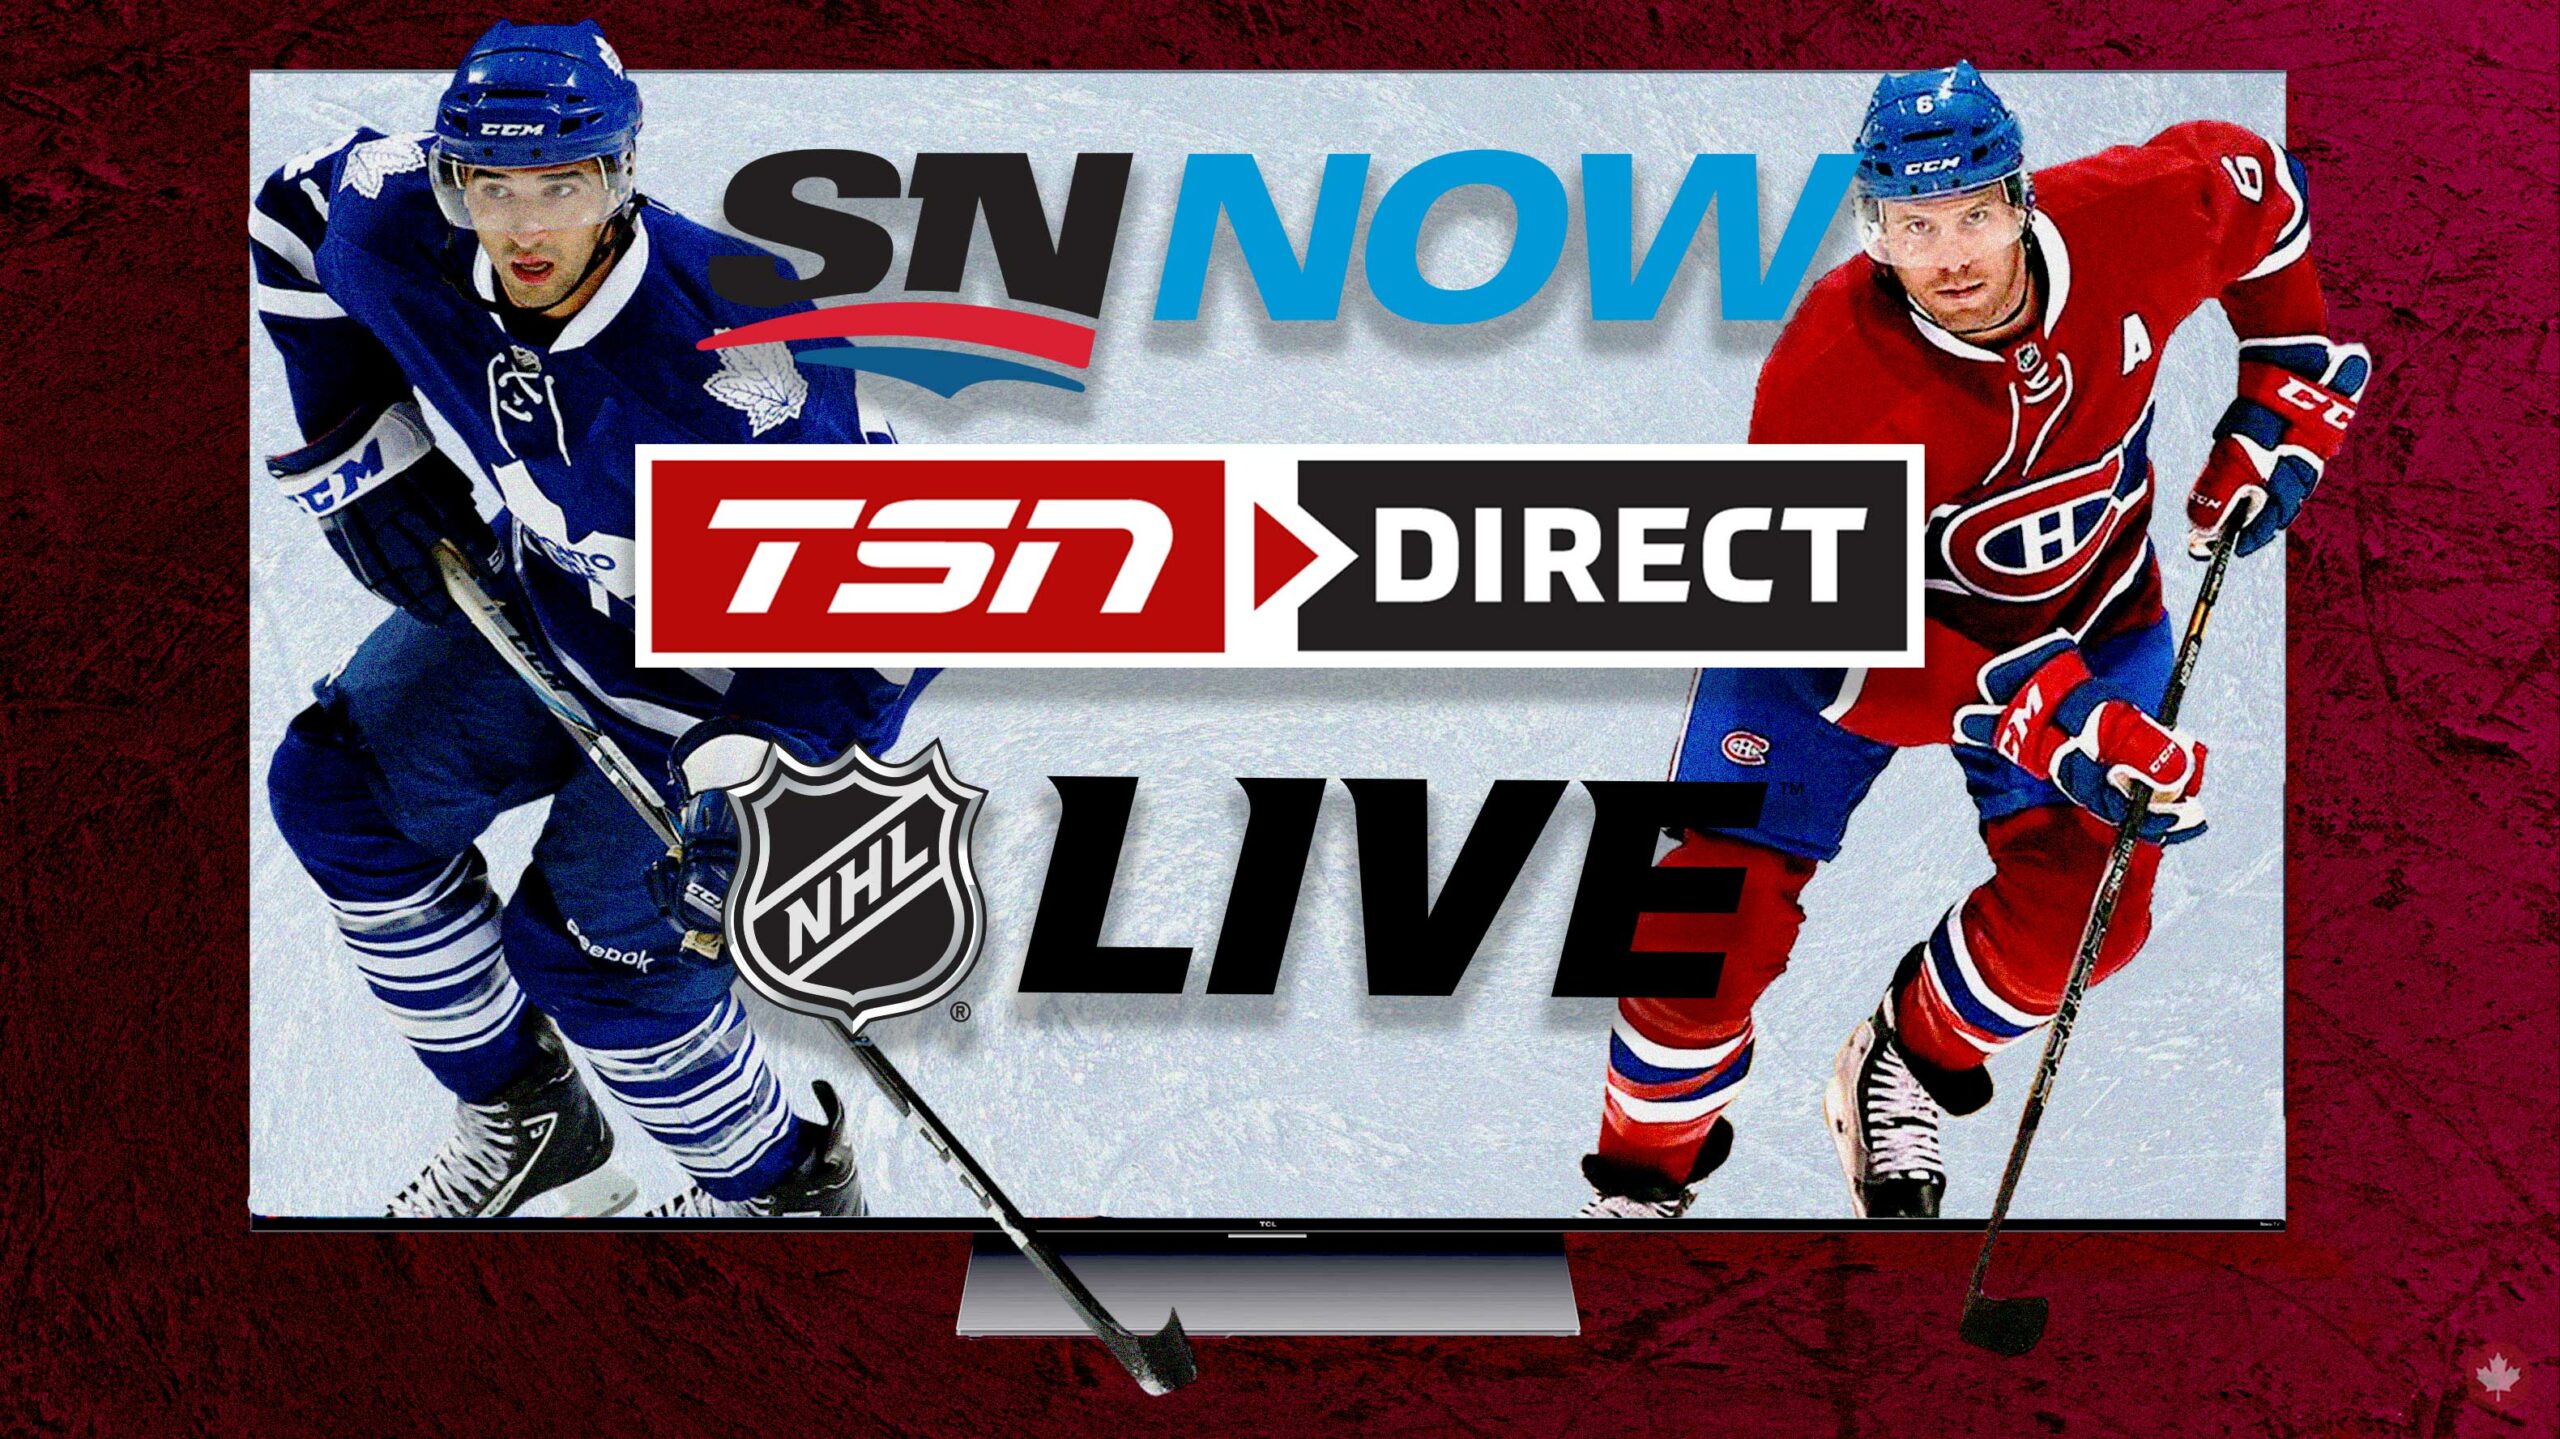 The image promotes TSN Direct's live NHL coverage, featuring two hockey players from opposing teams.